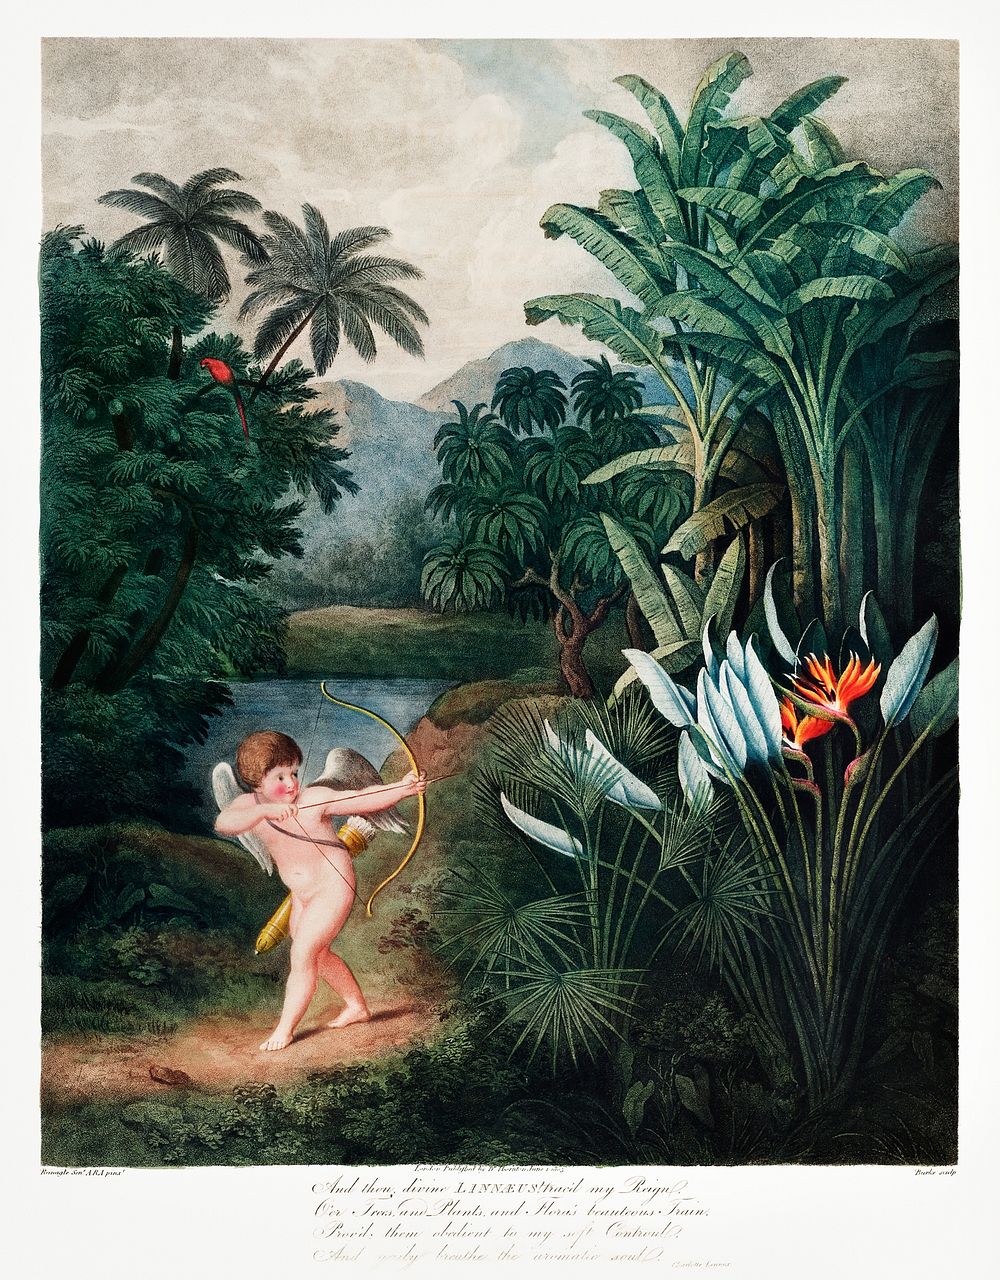 Cupid Inspiring Plants with Love from The Temple of Flora (1807) by Robert John Thornton. Original from Biodiversity…